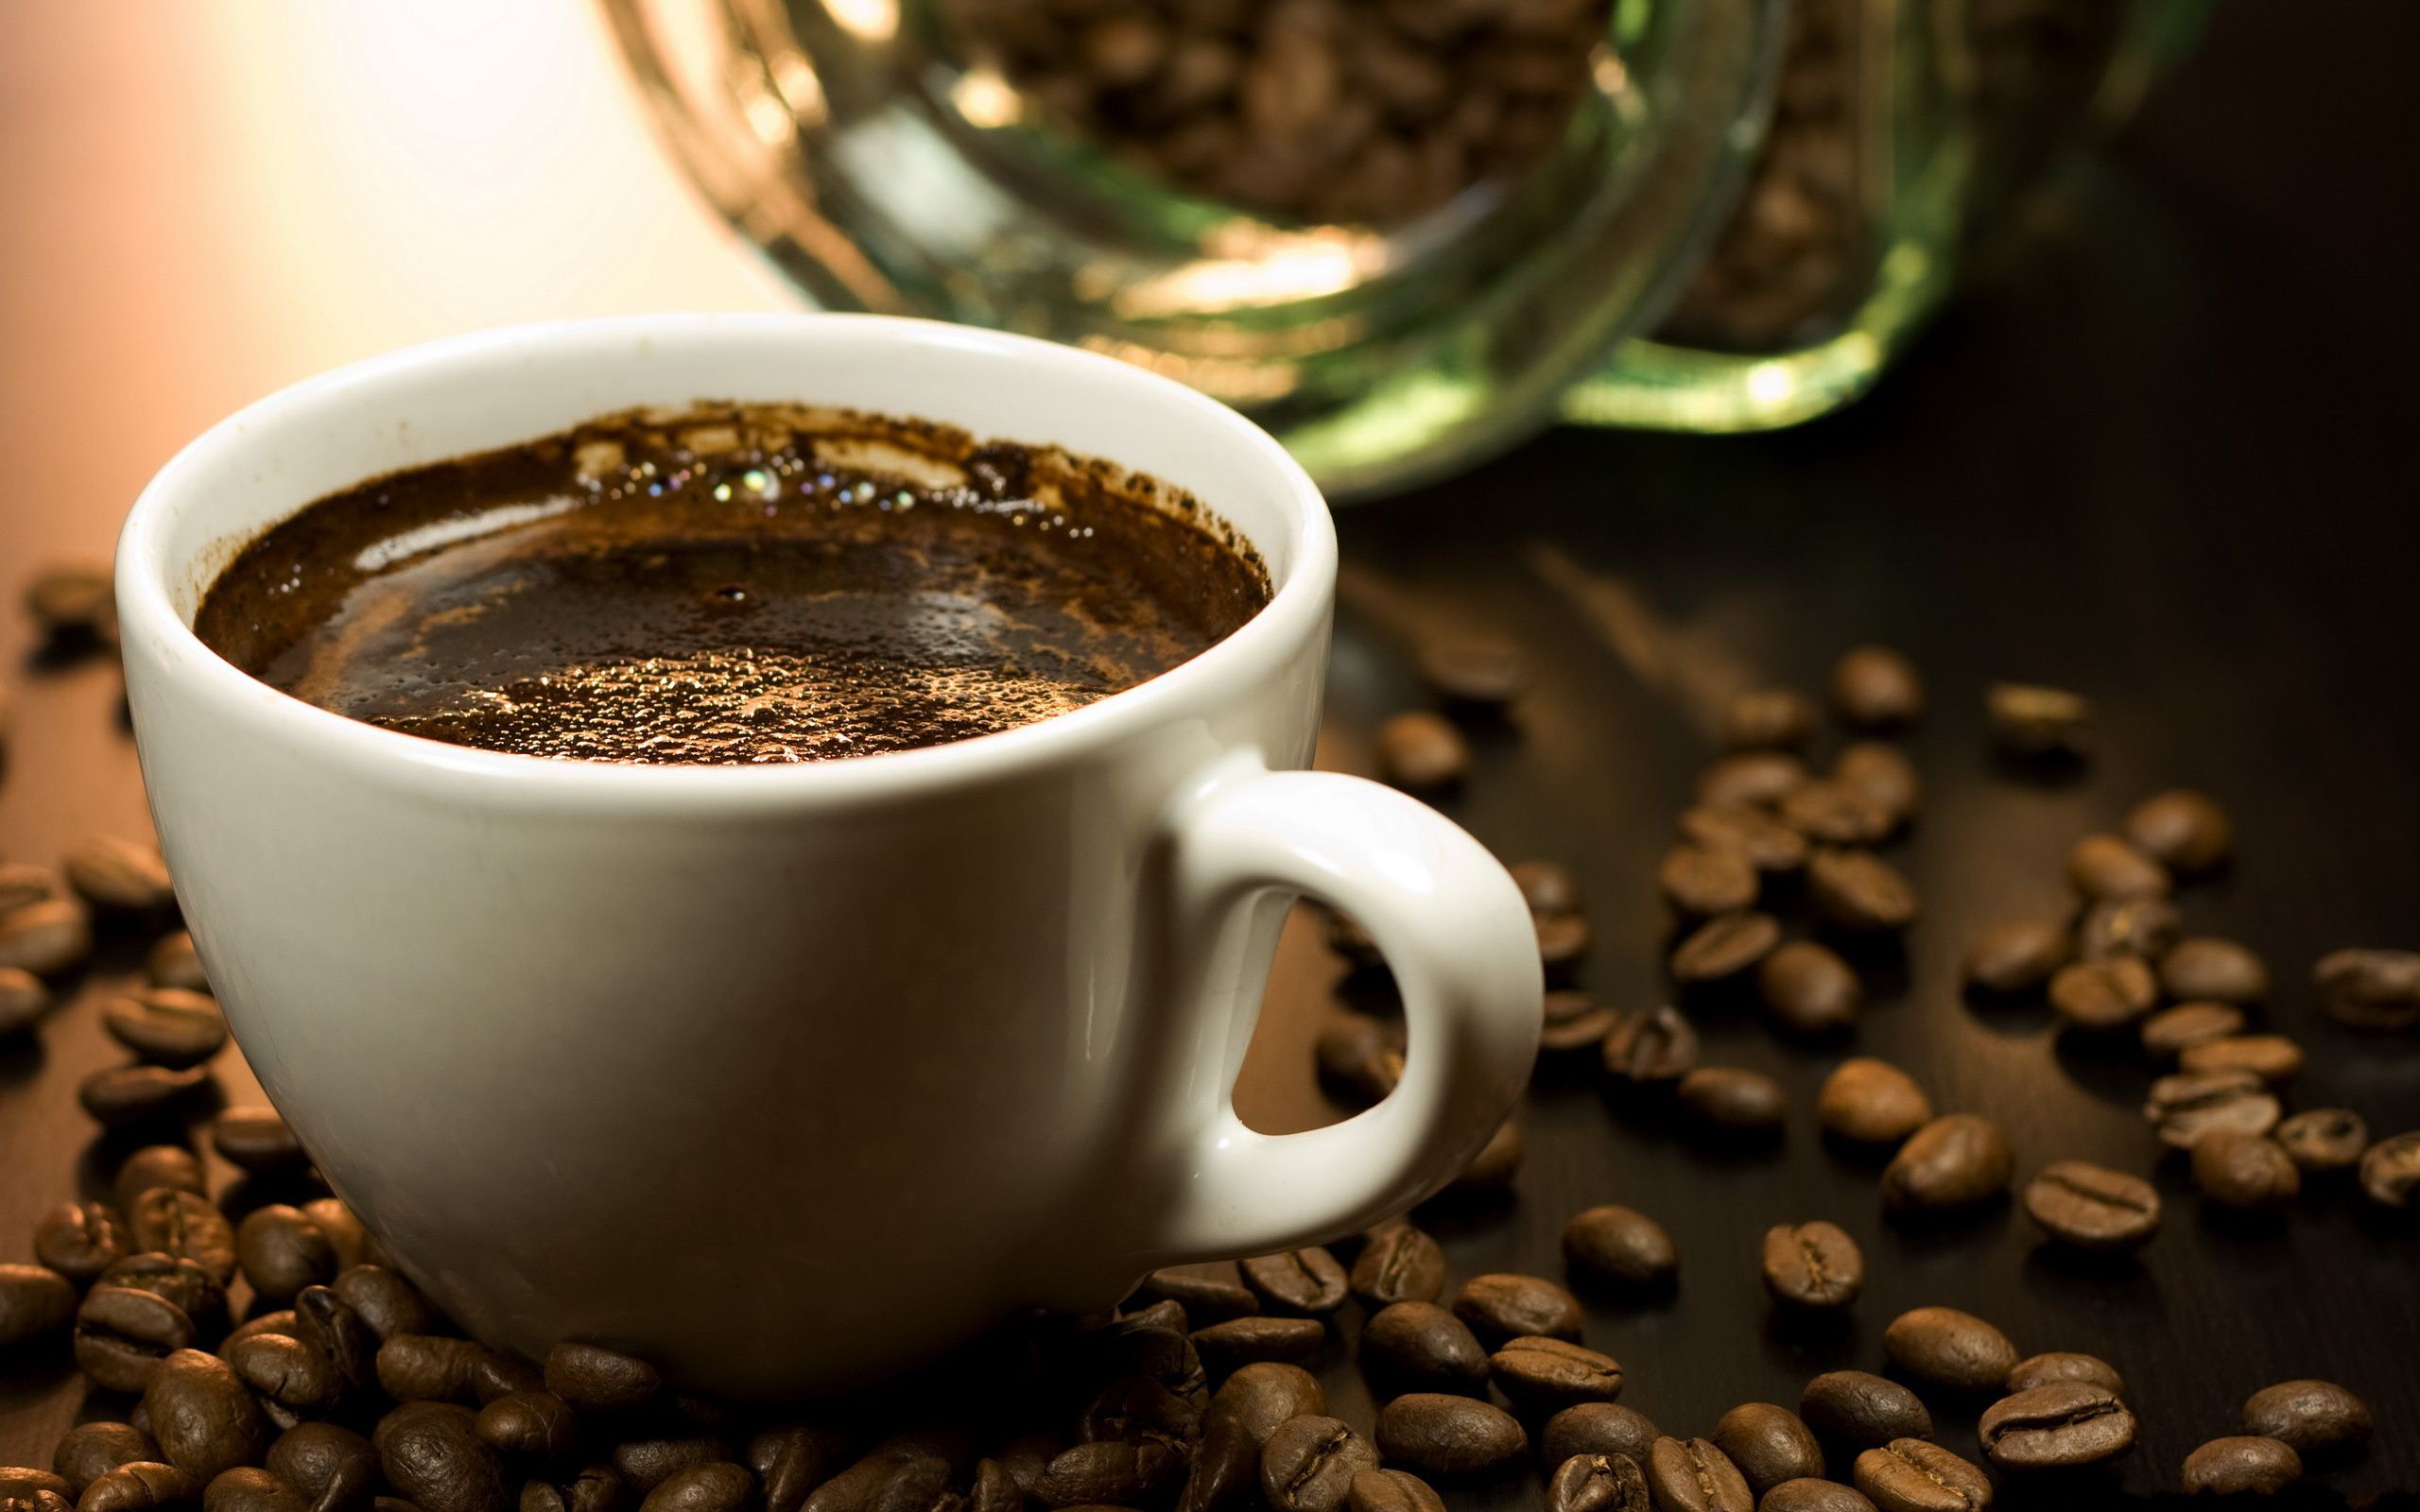 Black coffee daily can cut liver disease risk: Experts | | NRI Pulse